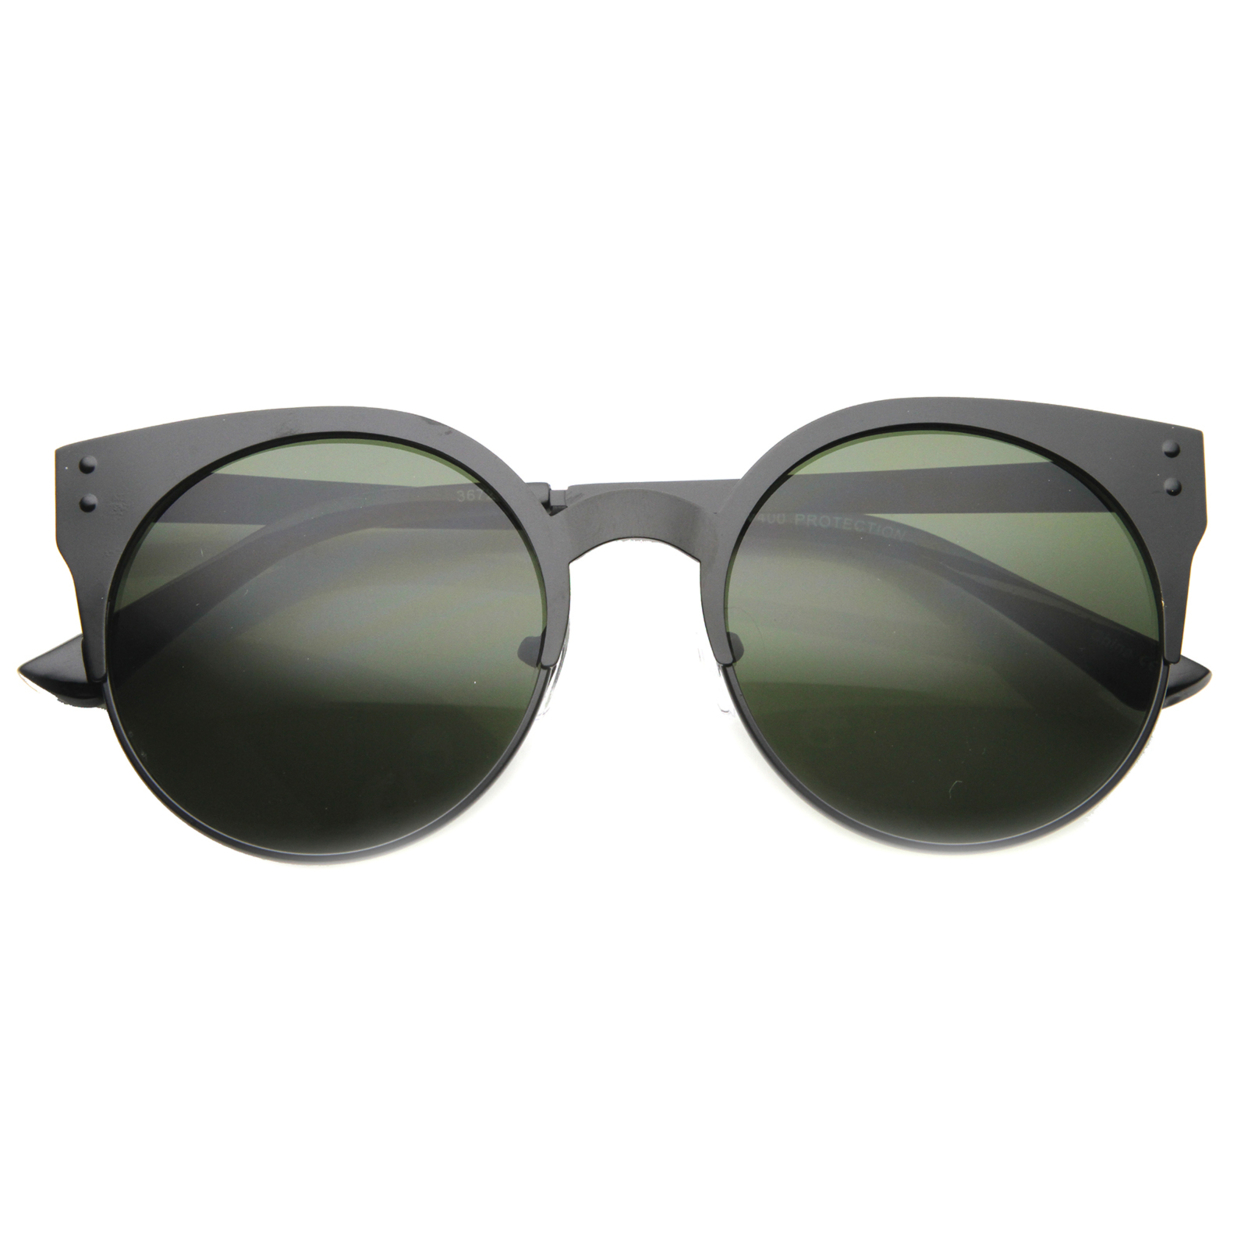 Womens Metal Cat Eye Sunglasses With UV400 Protected Composite Lens 9917 - Black / Green